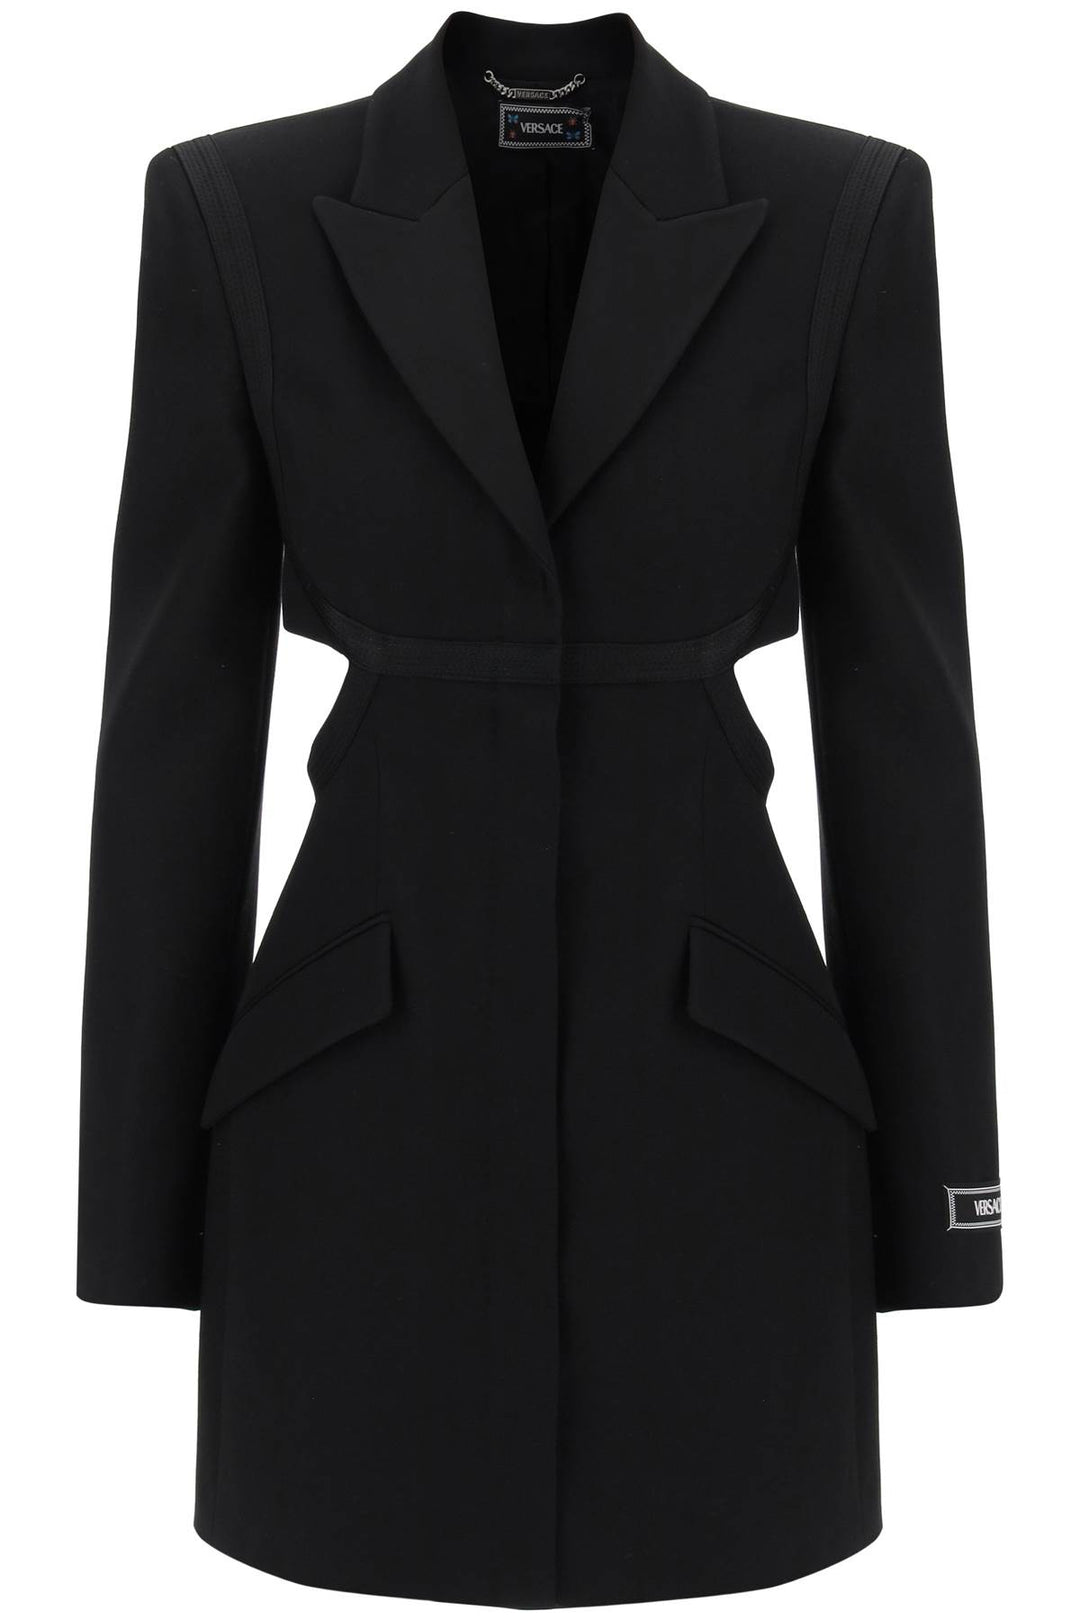 Versace blazer dress with cut-outs-0